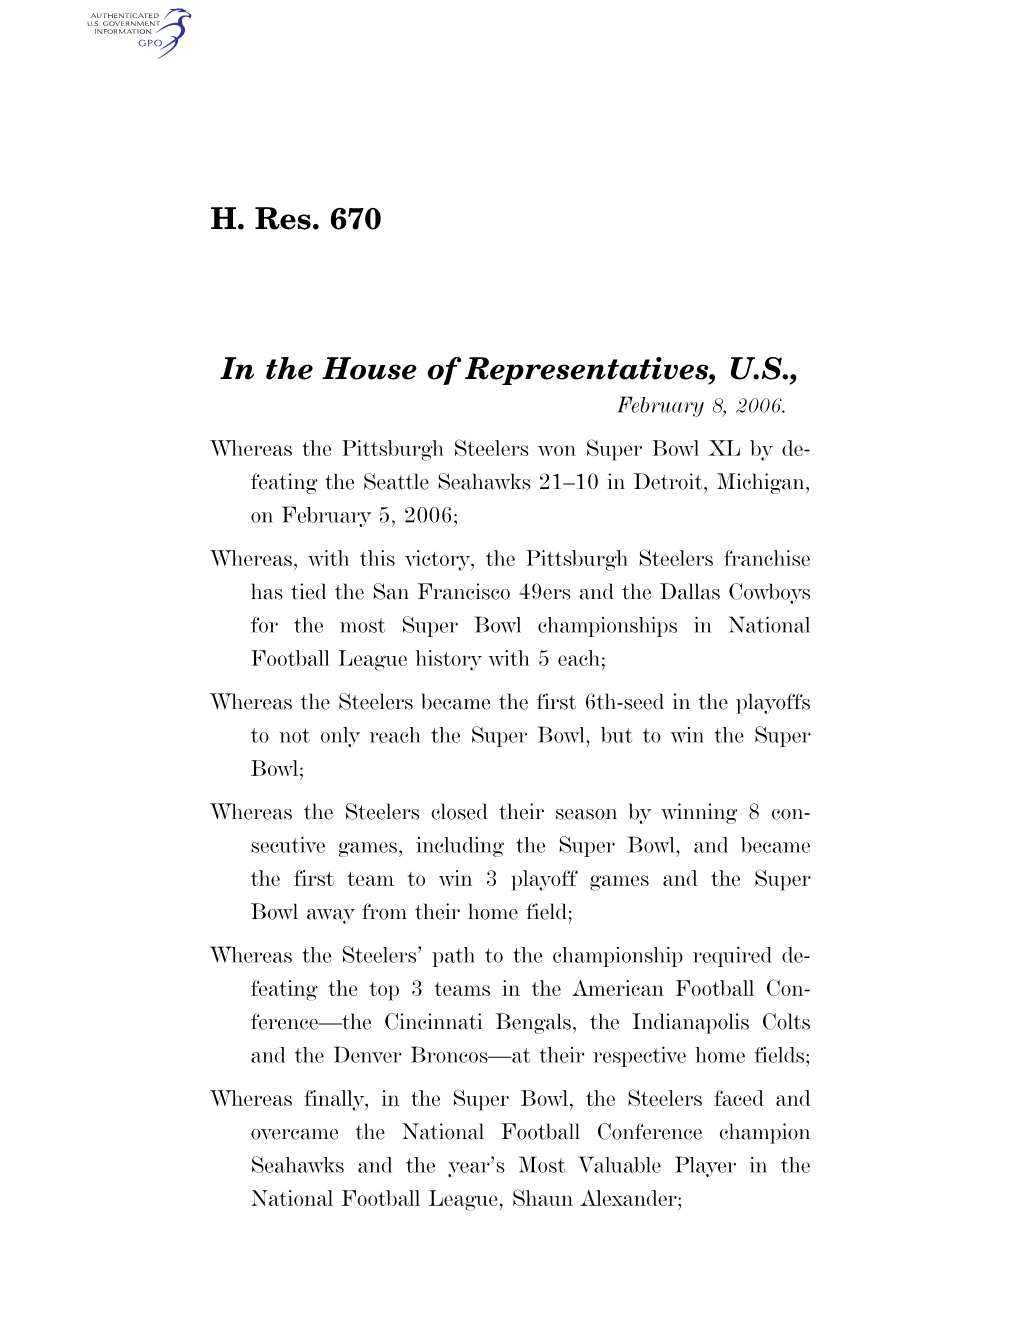 H. Res. 670 in the House of Representatives, U.S